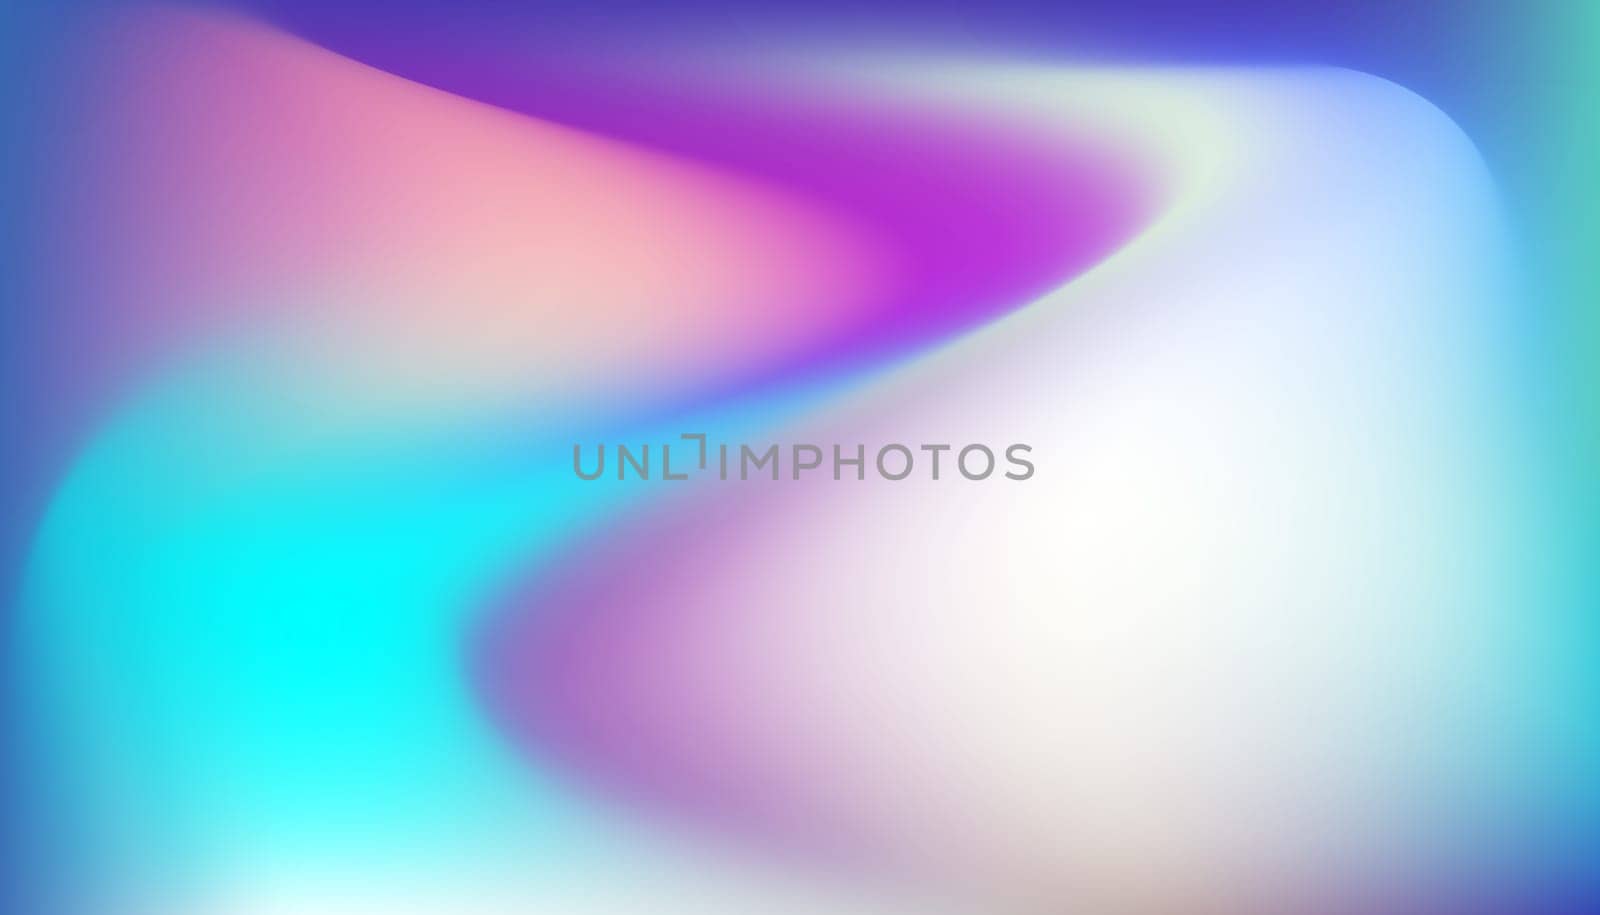 grainy gradient background with hologram effect by jackreznor